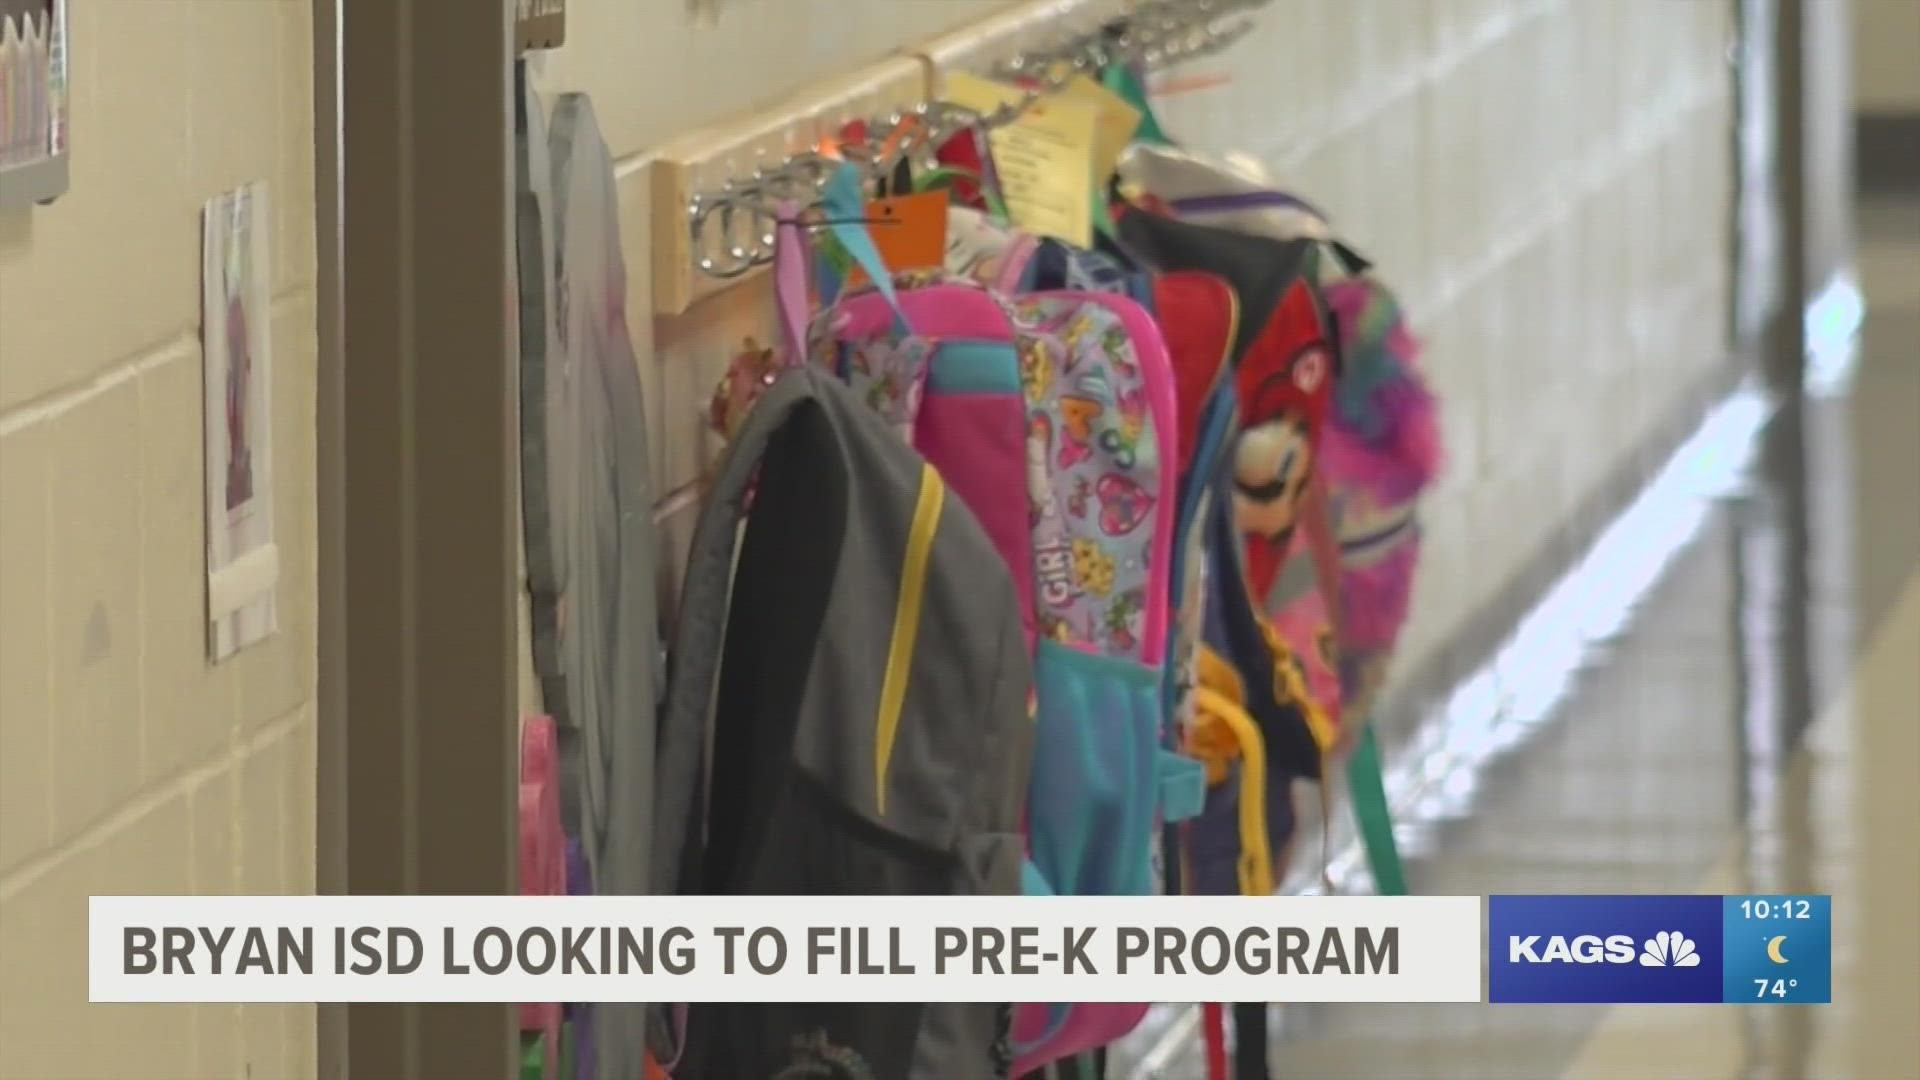 Bryan ISD is looking to fill hundreds of Pre-K student seats while the district still works to mitigate COVID-19's effect in schools.